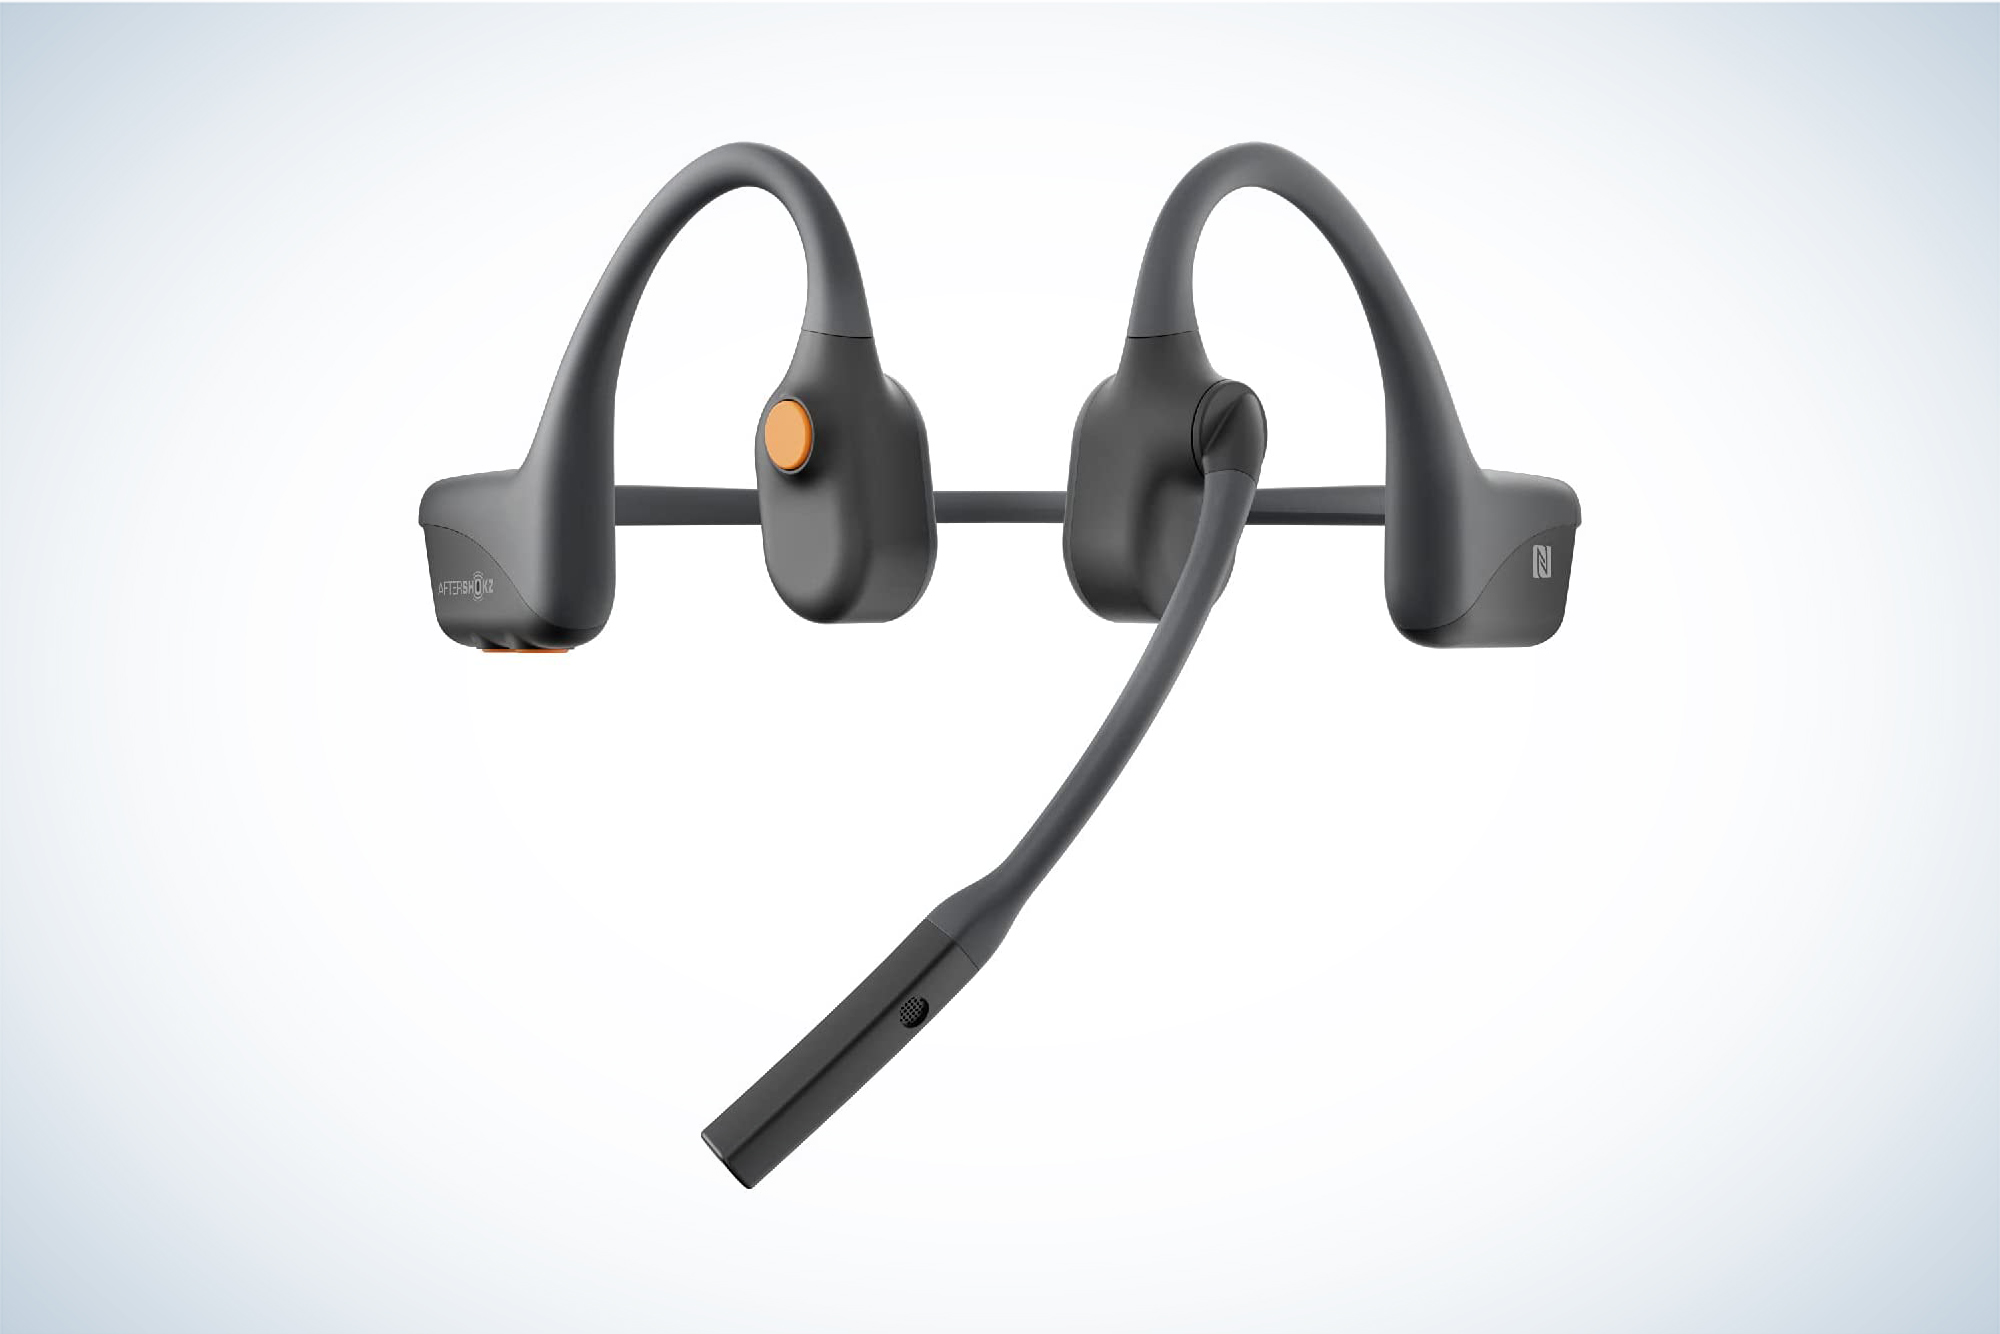 A pair of grey AfterShokz OpenComm bone conduction headphones with a built-in microphone arm